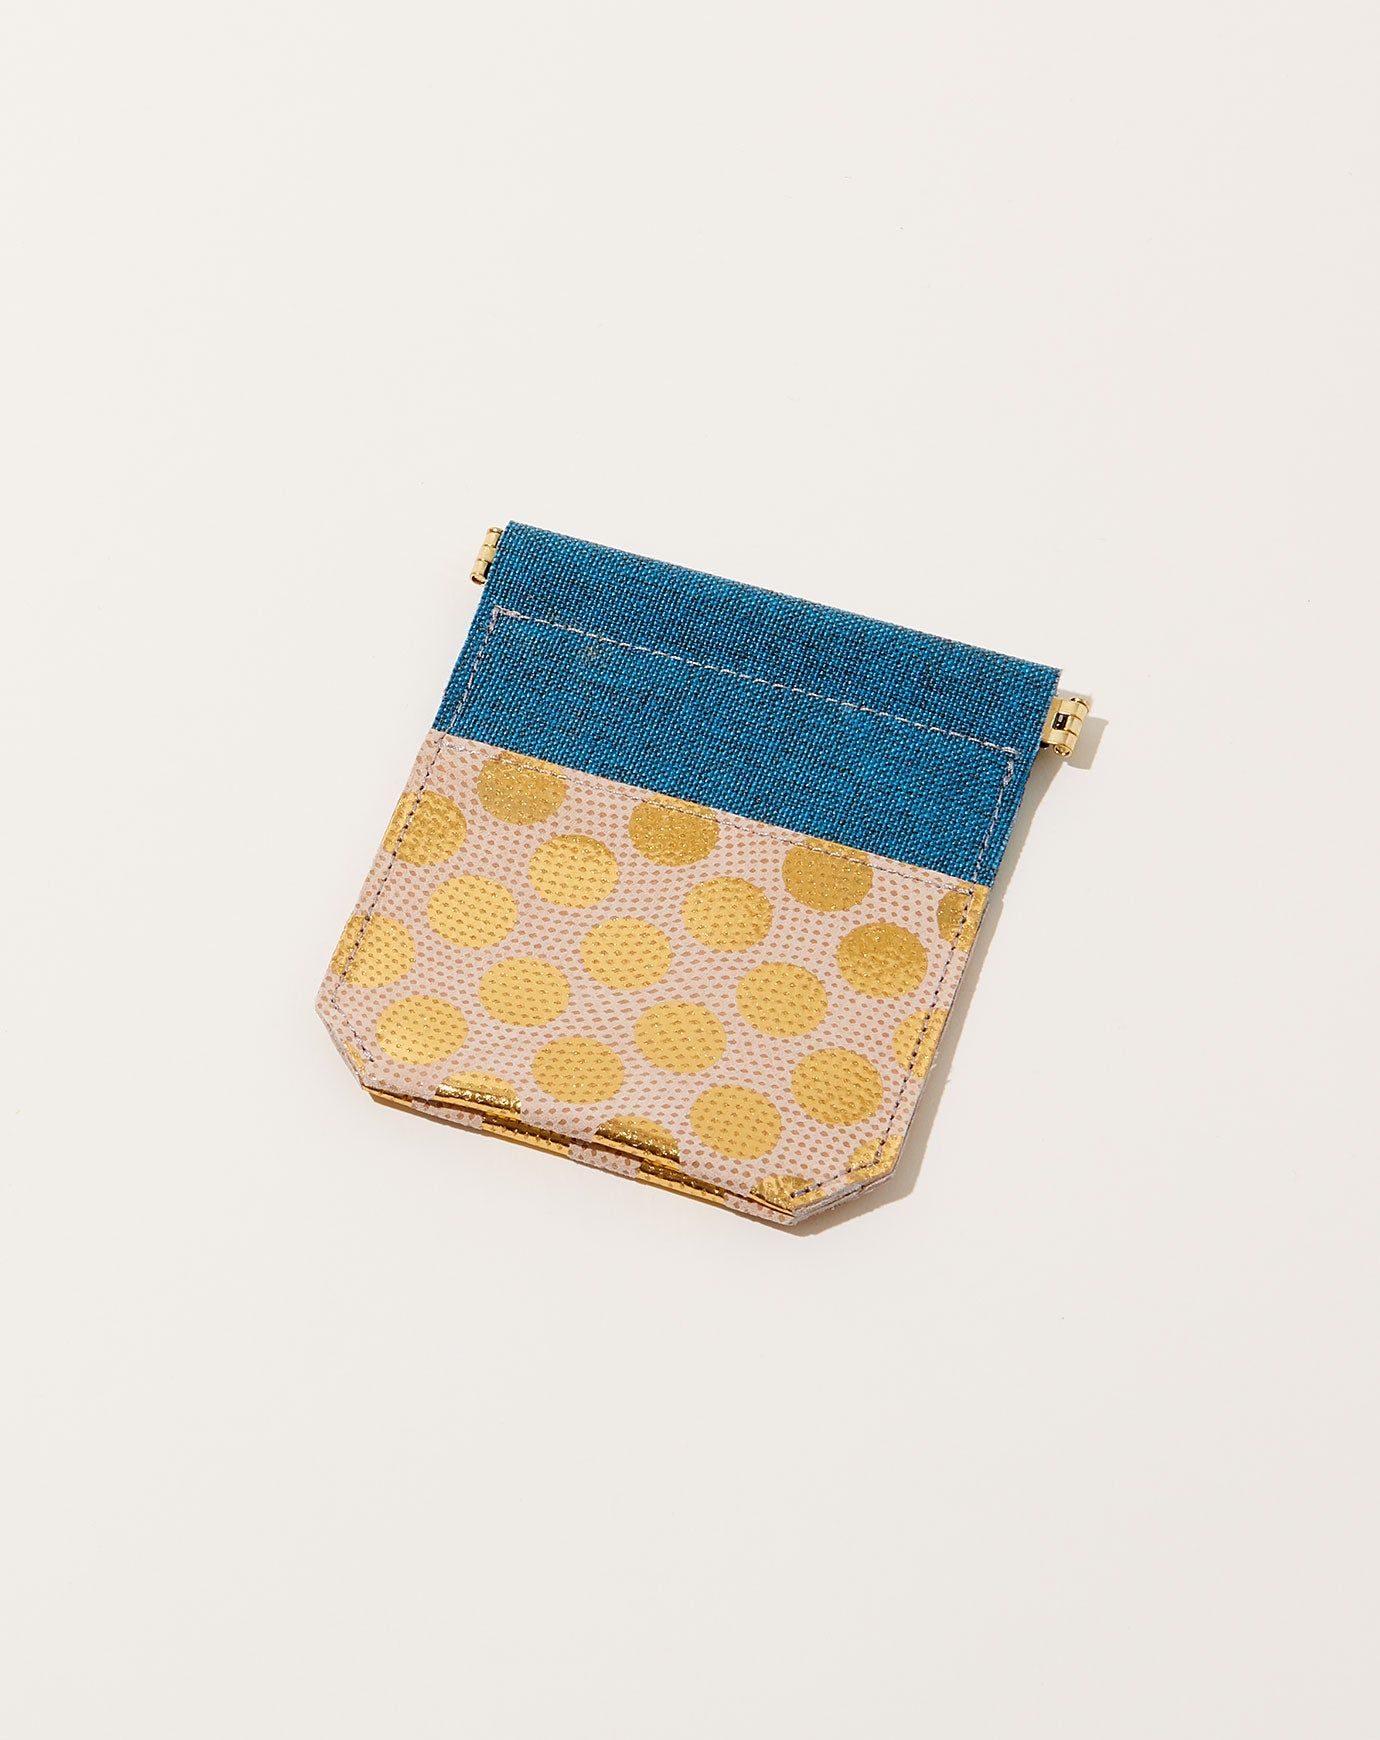 Carmine Ecology Leather Mini Pouch in Gold